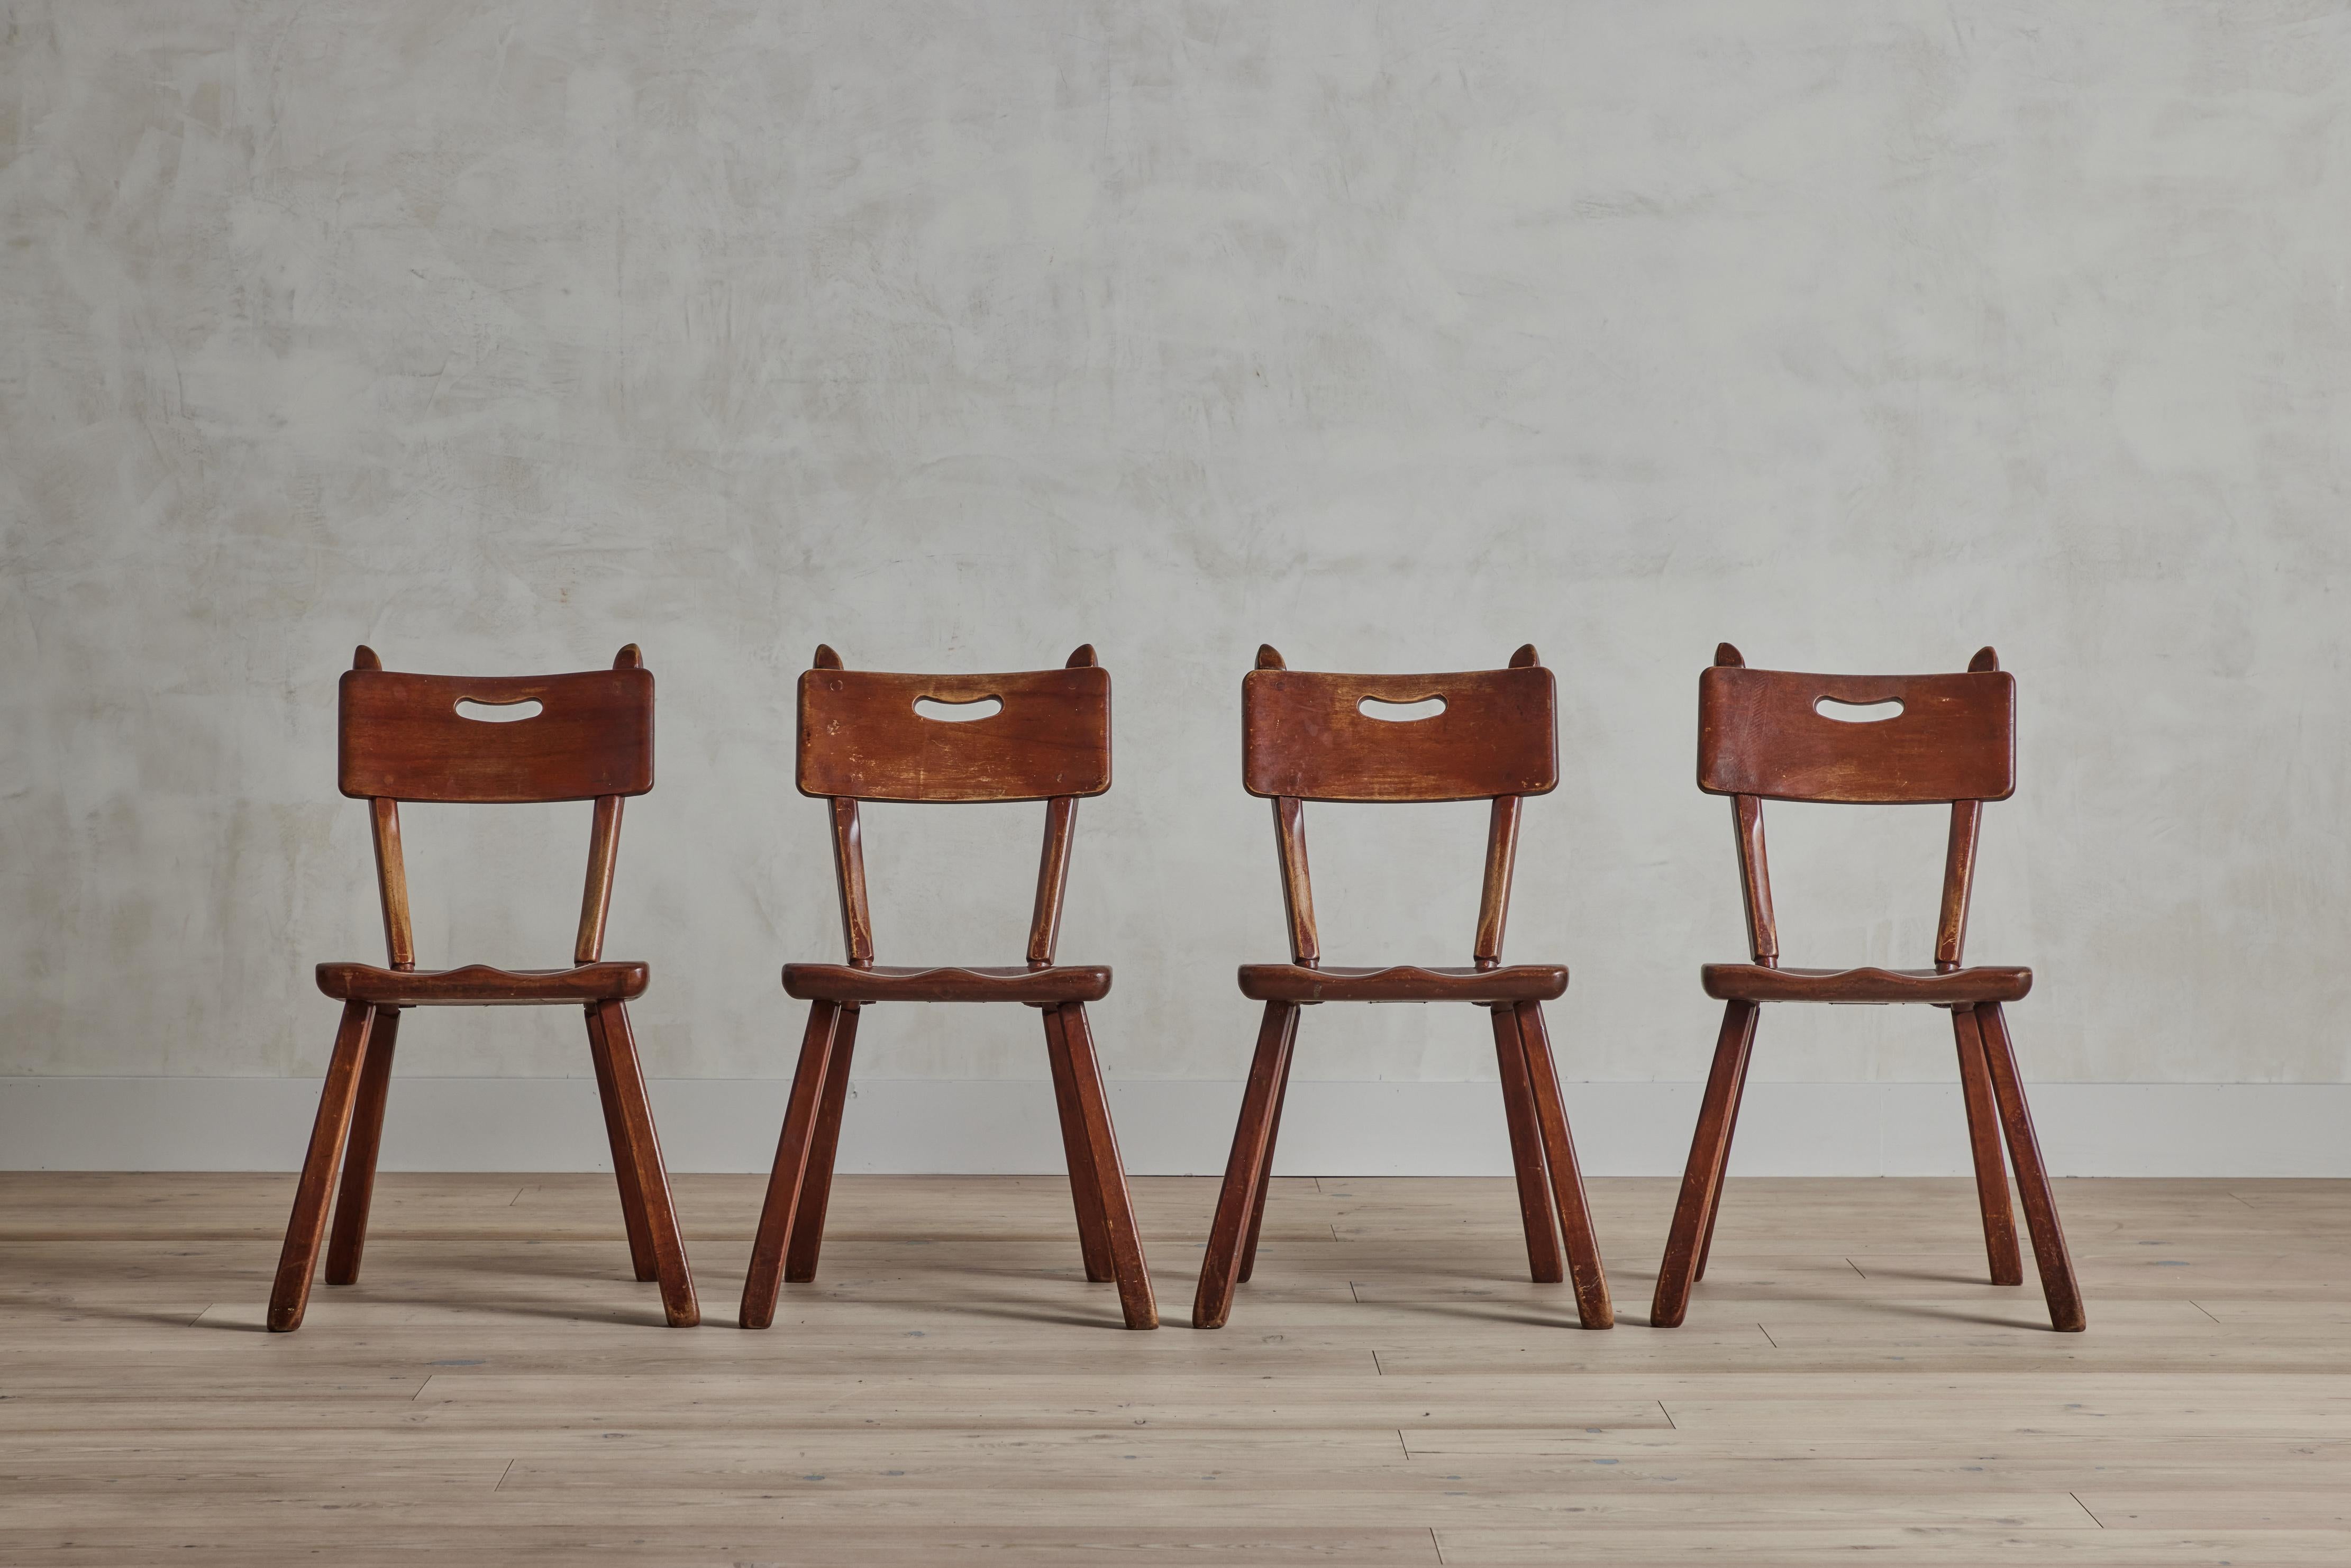 Set of four Cushman Colonial Creations maple wood dining chairs by Herman De Vries. Some visible wear on original finish. Chairs have been cleaned and waxed. United States, circa 1940.